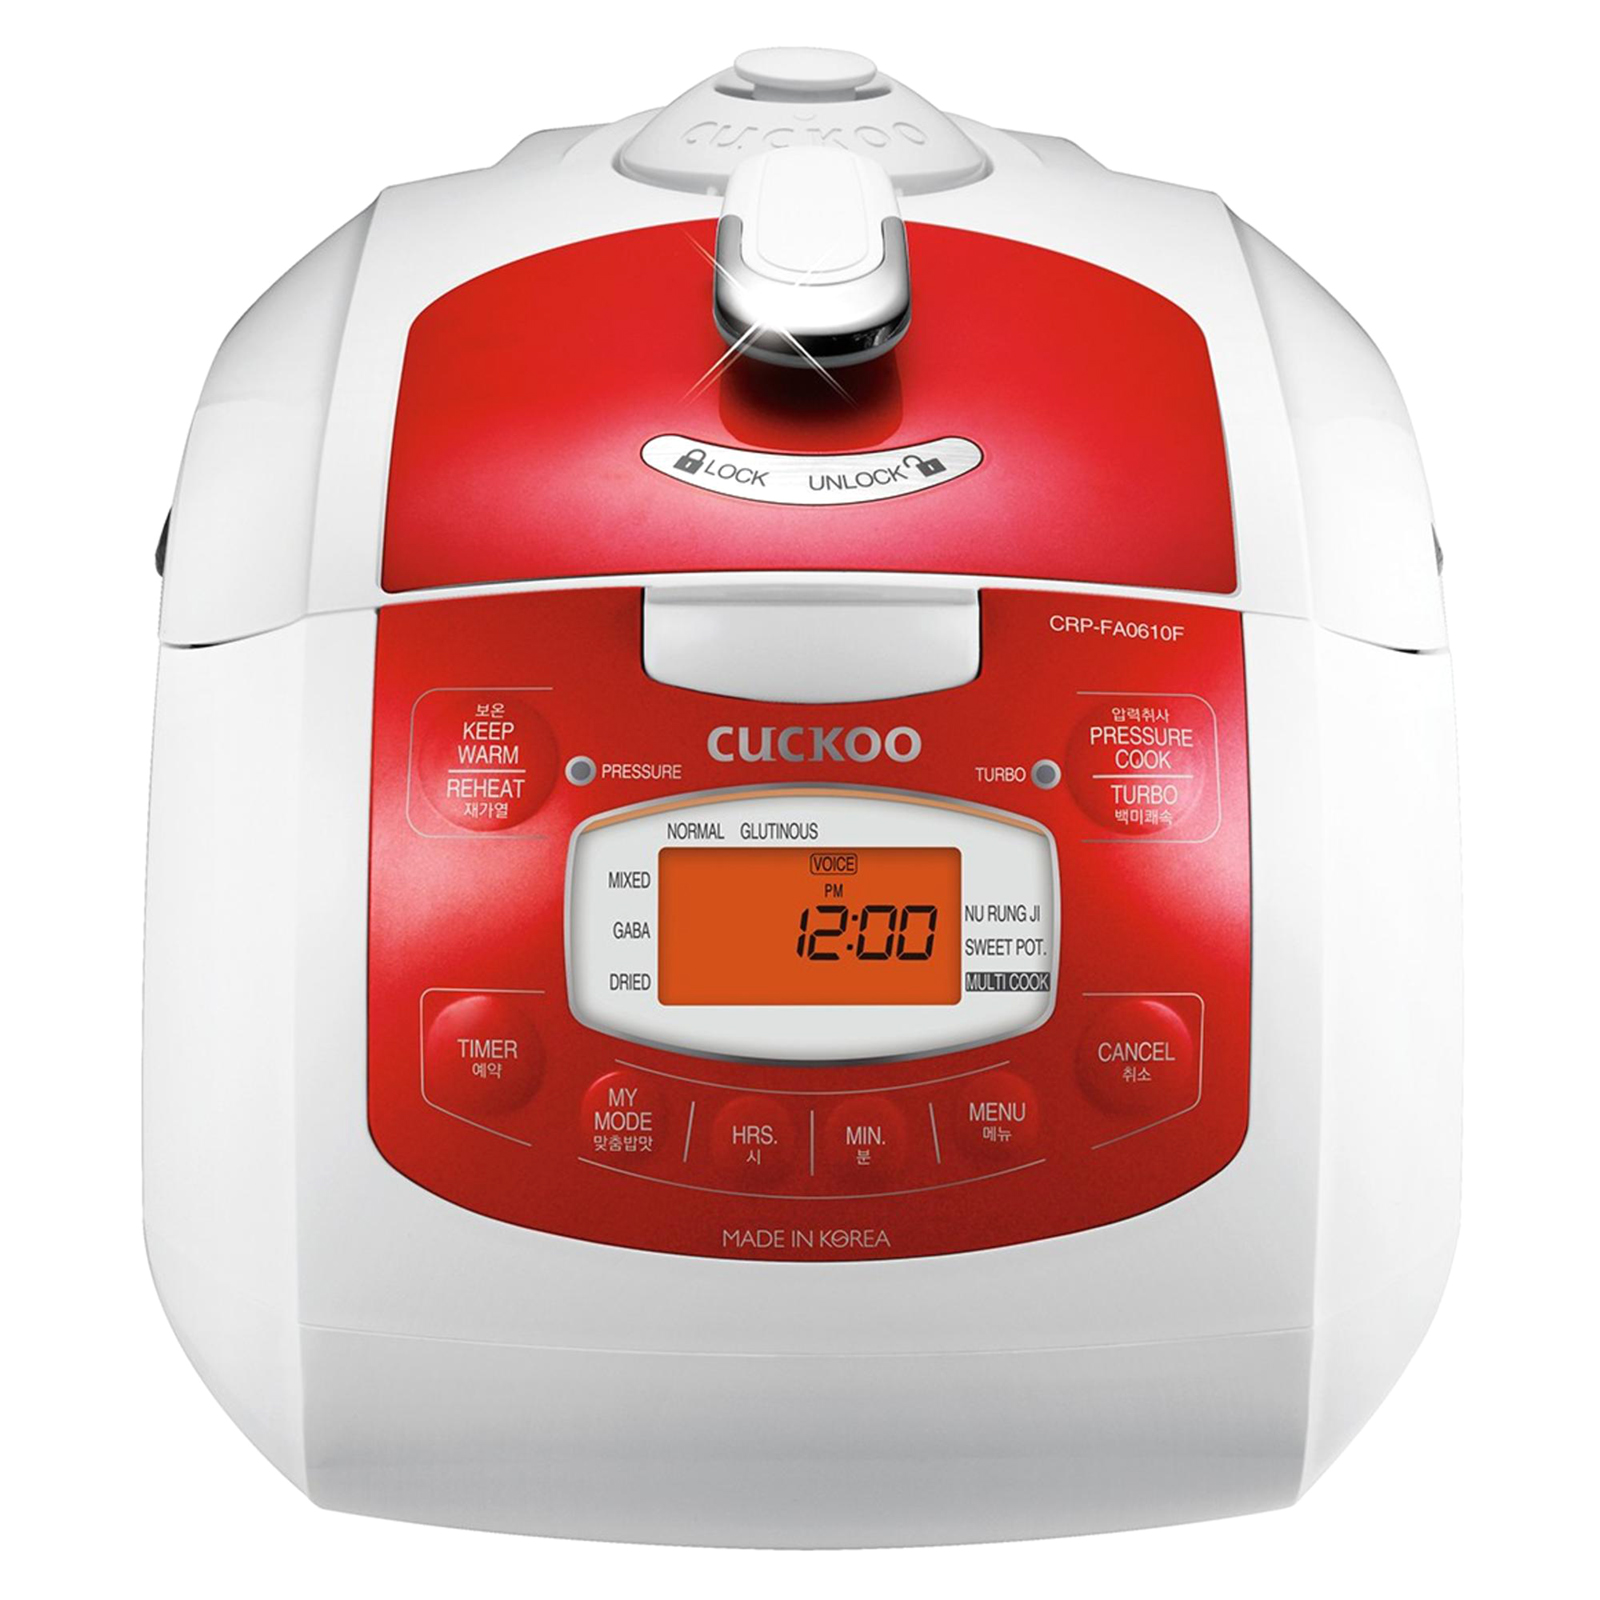 CUCKOO CRP-FA0610FR 6-Cup Electric Pressure Rice Cooker - Red